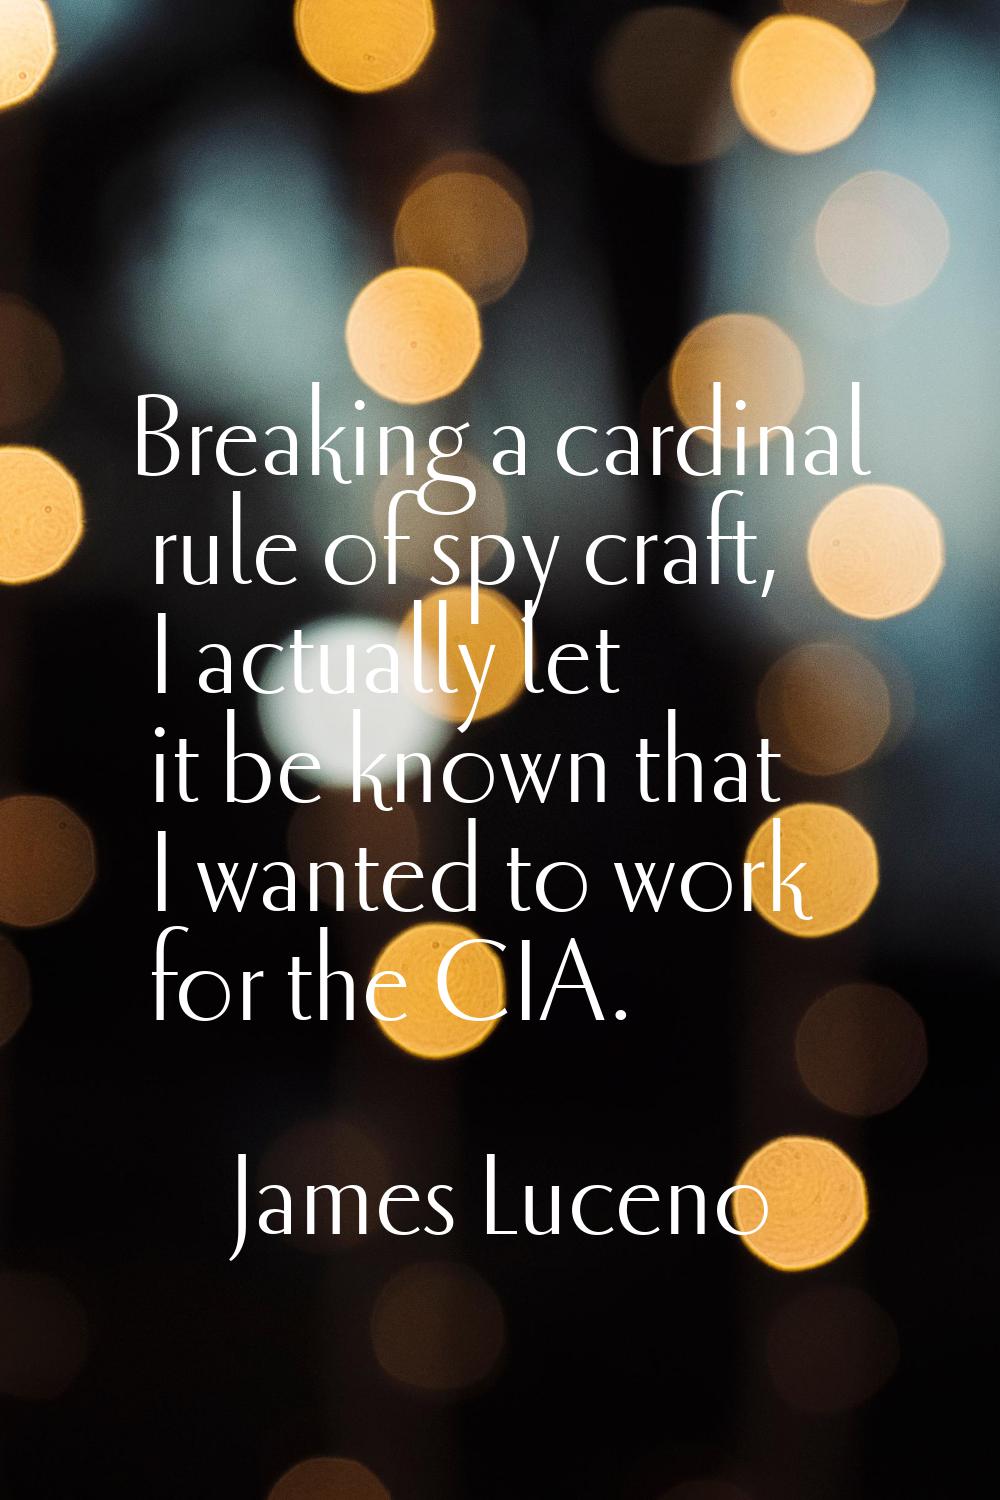 Breaking a cardinal rule of spy craft, I actually let it be known that I wanted to work for the CIA